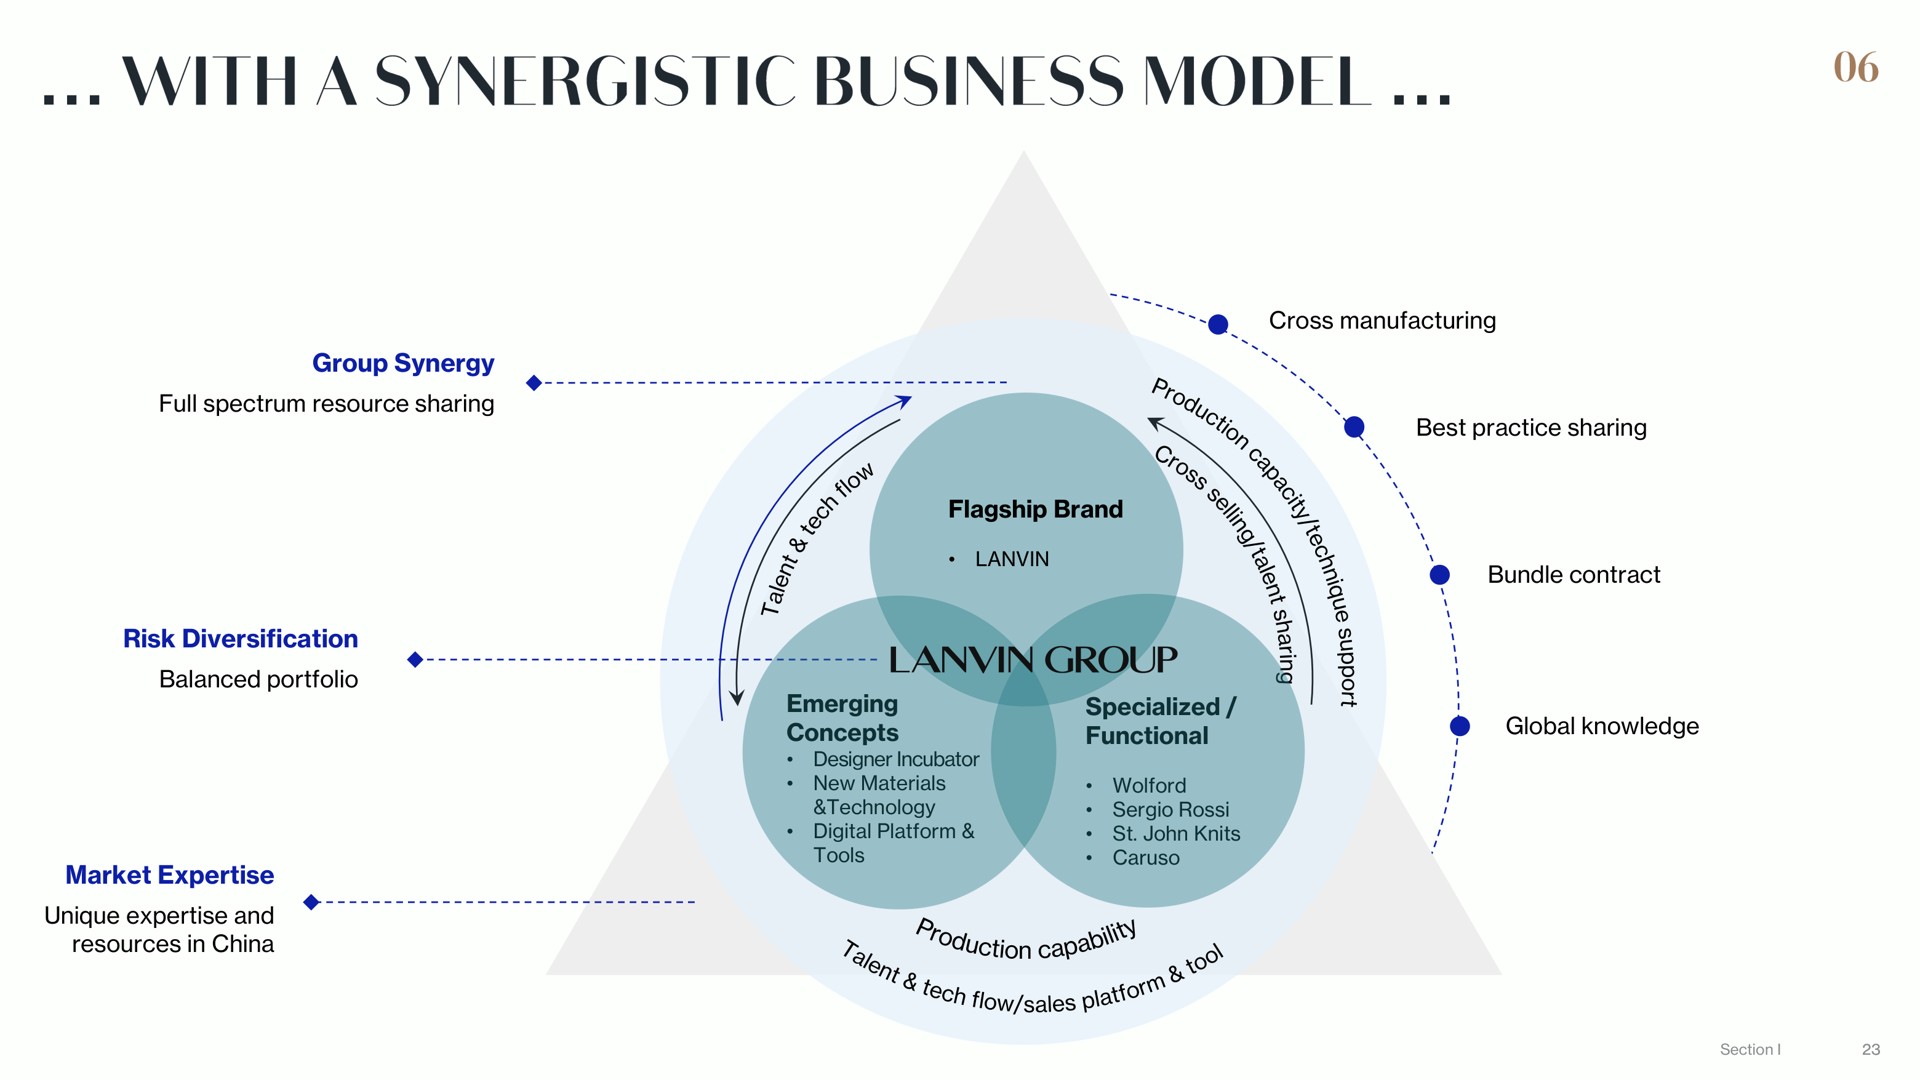 group synergy full spectrum resource sharing risk diversification balanced portfolio market unique and resources in china cross manufacturing best practice sharing bundle contract global knowledge flagship brand emerging concepts specialized functional synergistic business model a | Lanvin